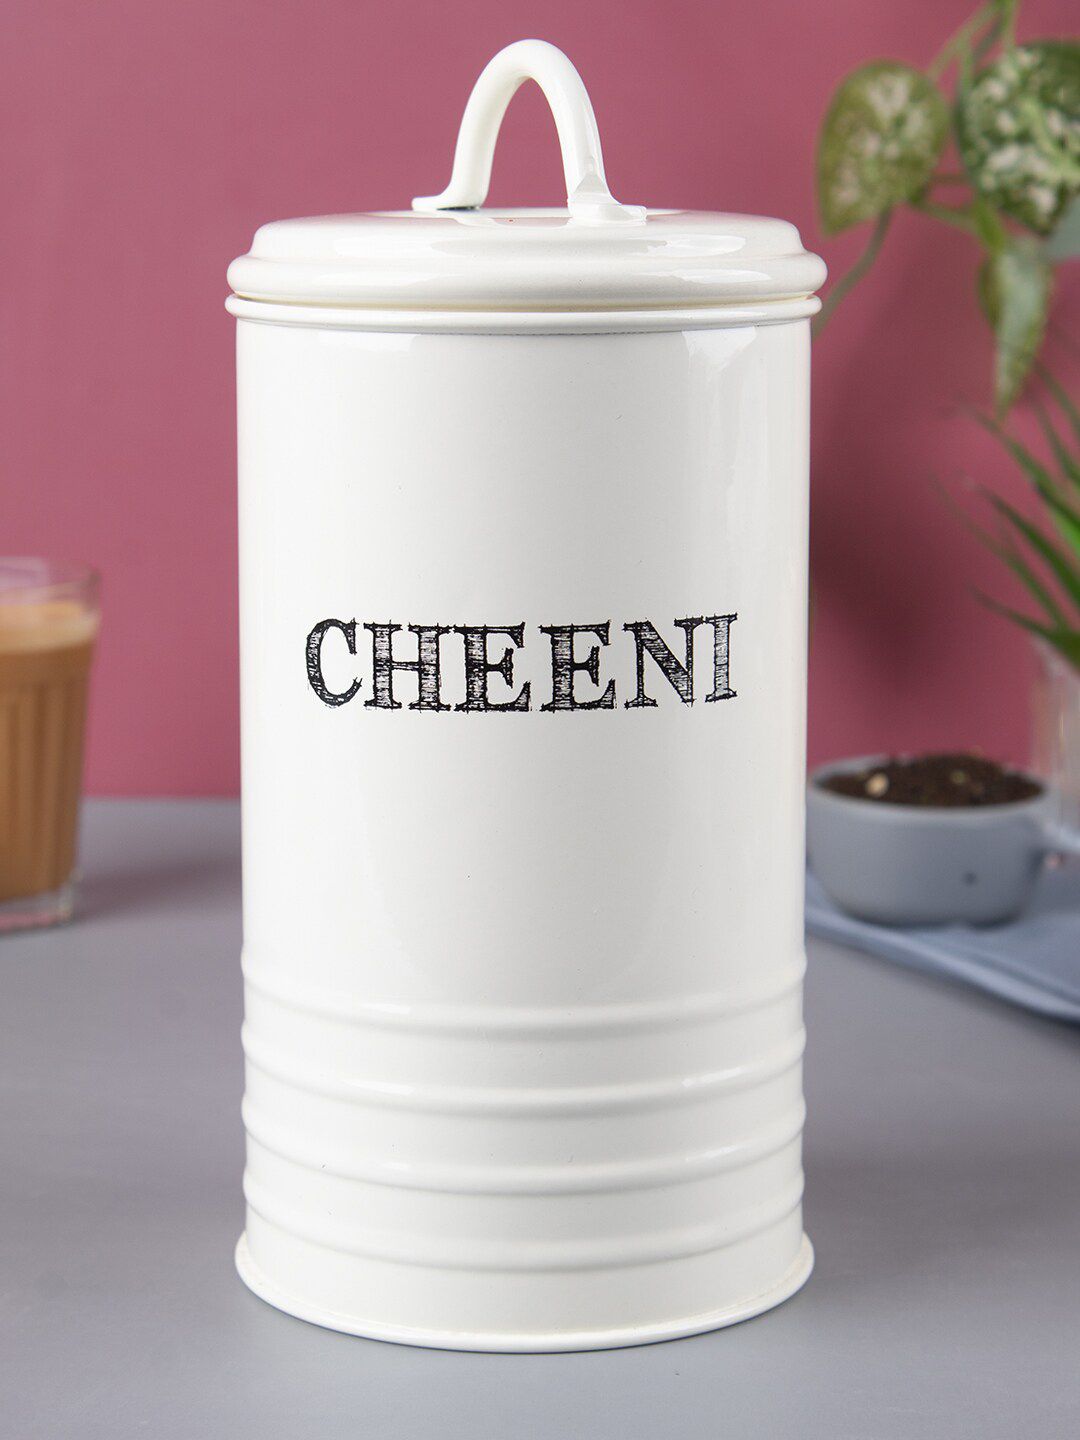 MARKET99 White Cylindrical Food Container Price in India